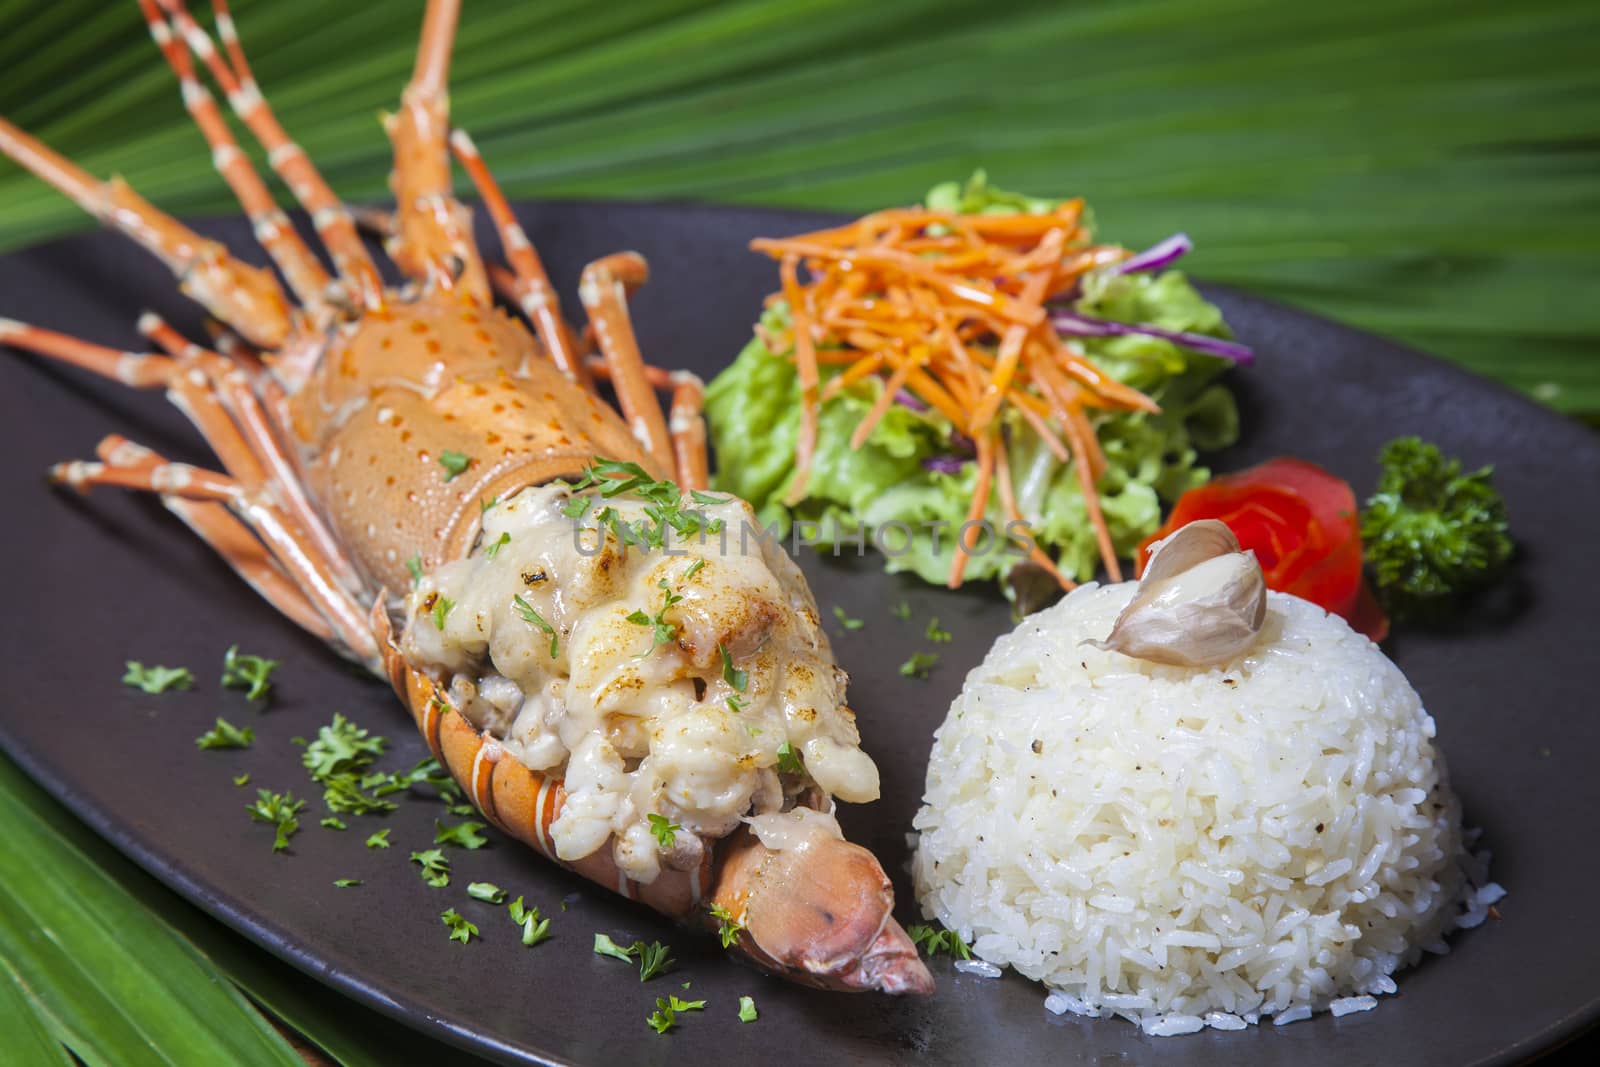 Seafood menu. There are lobster and rice ,Thai food in a luxury hotel.